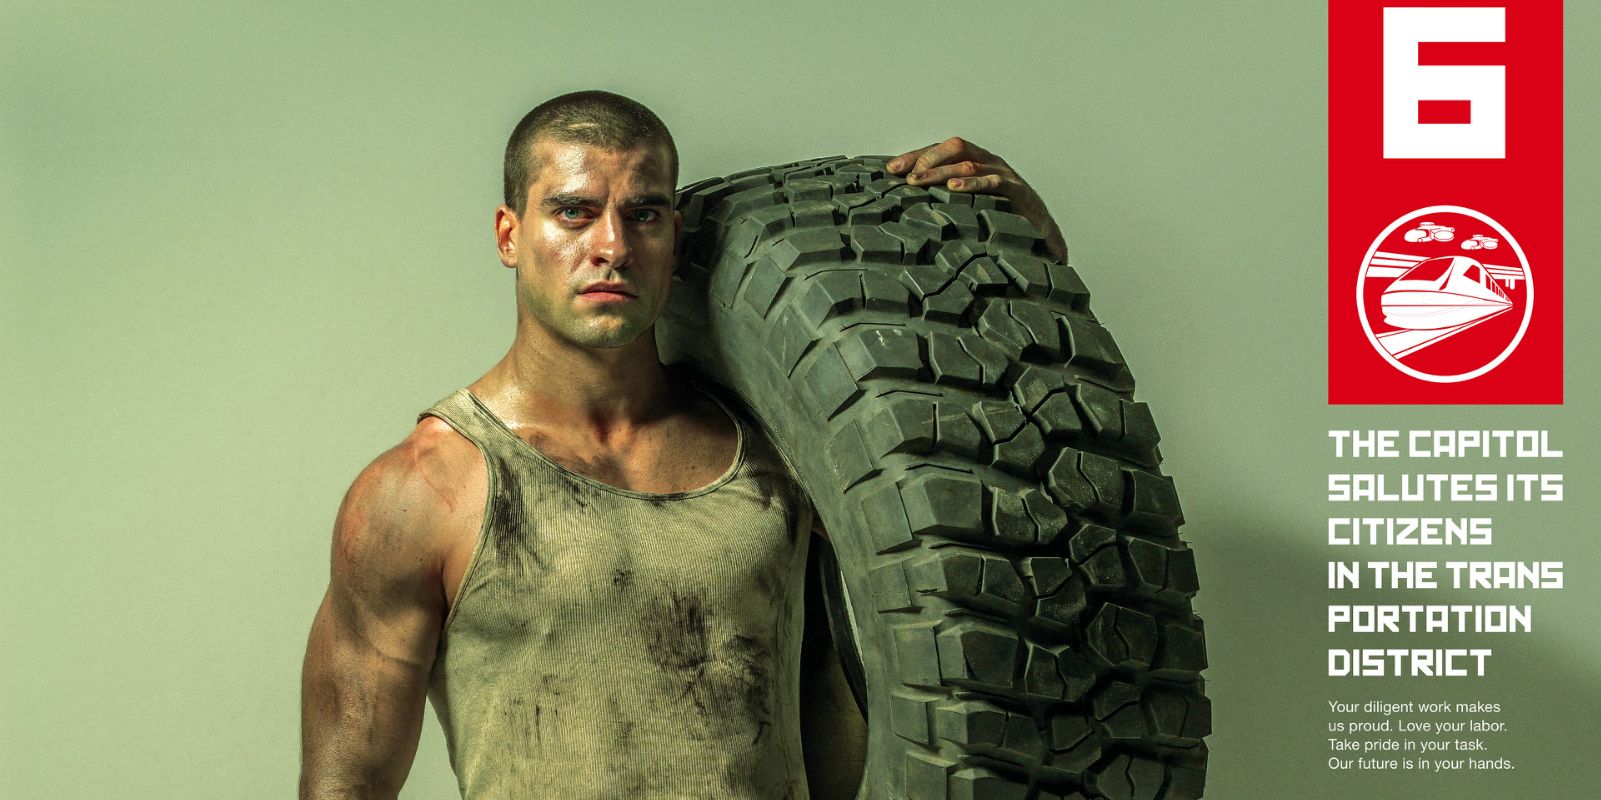 Hunger Games District 6 poster depicts a man carrying an oversized tire.